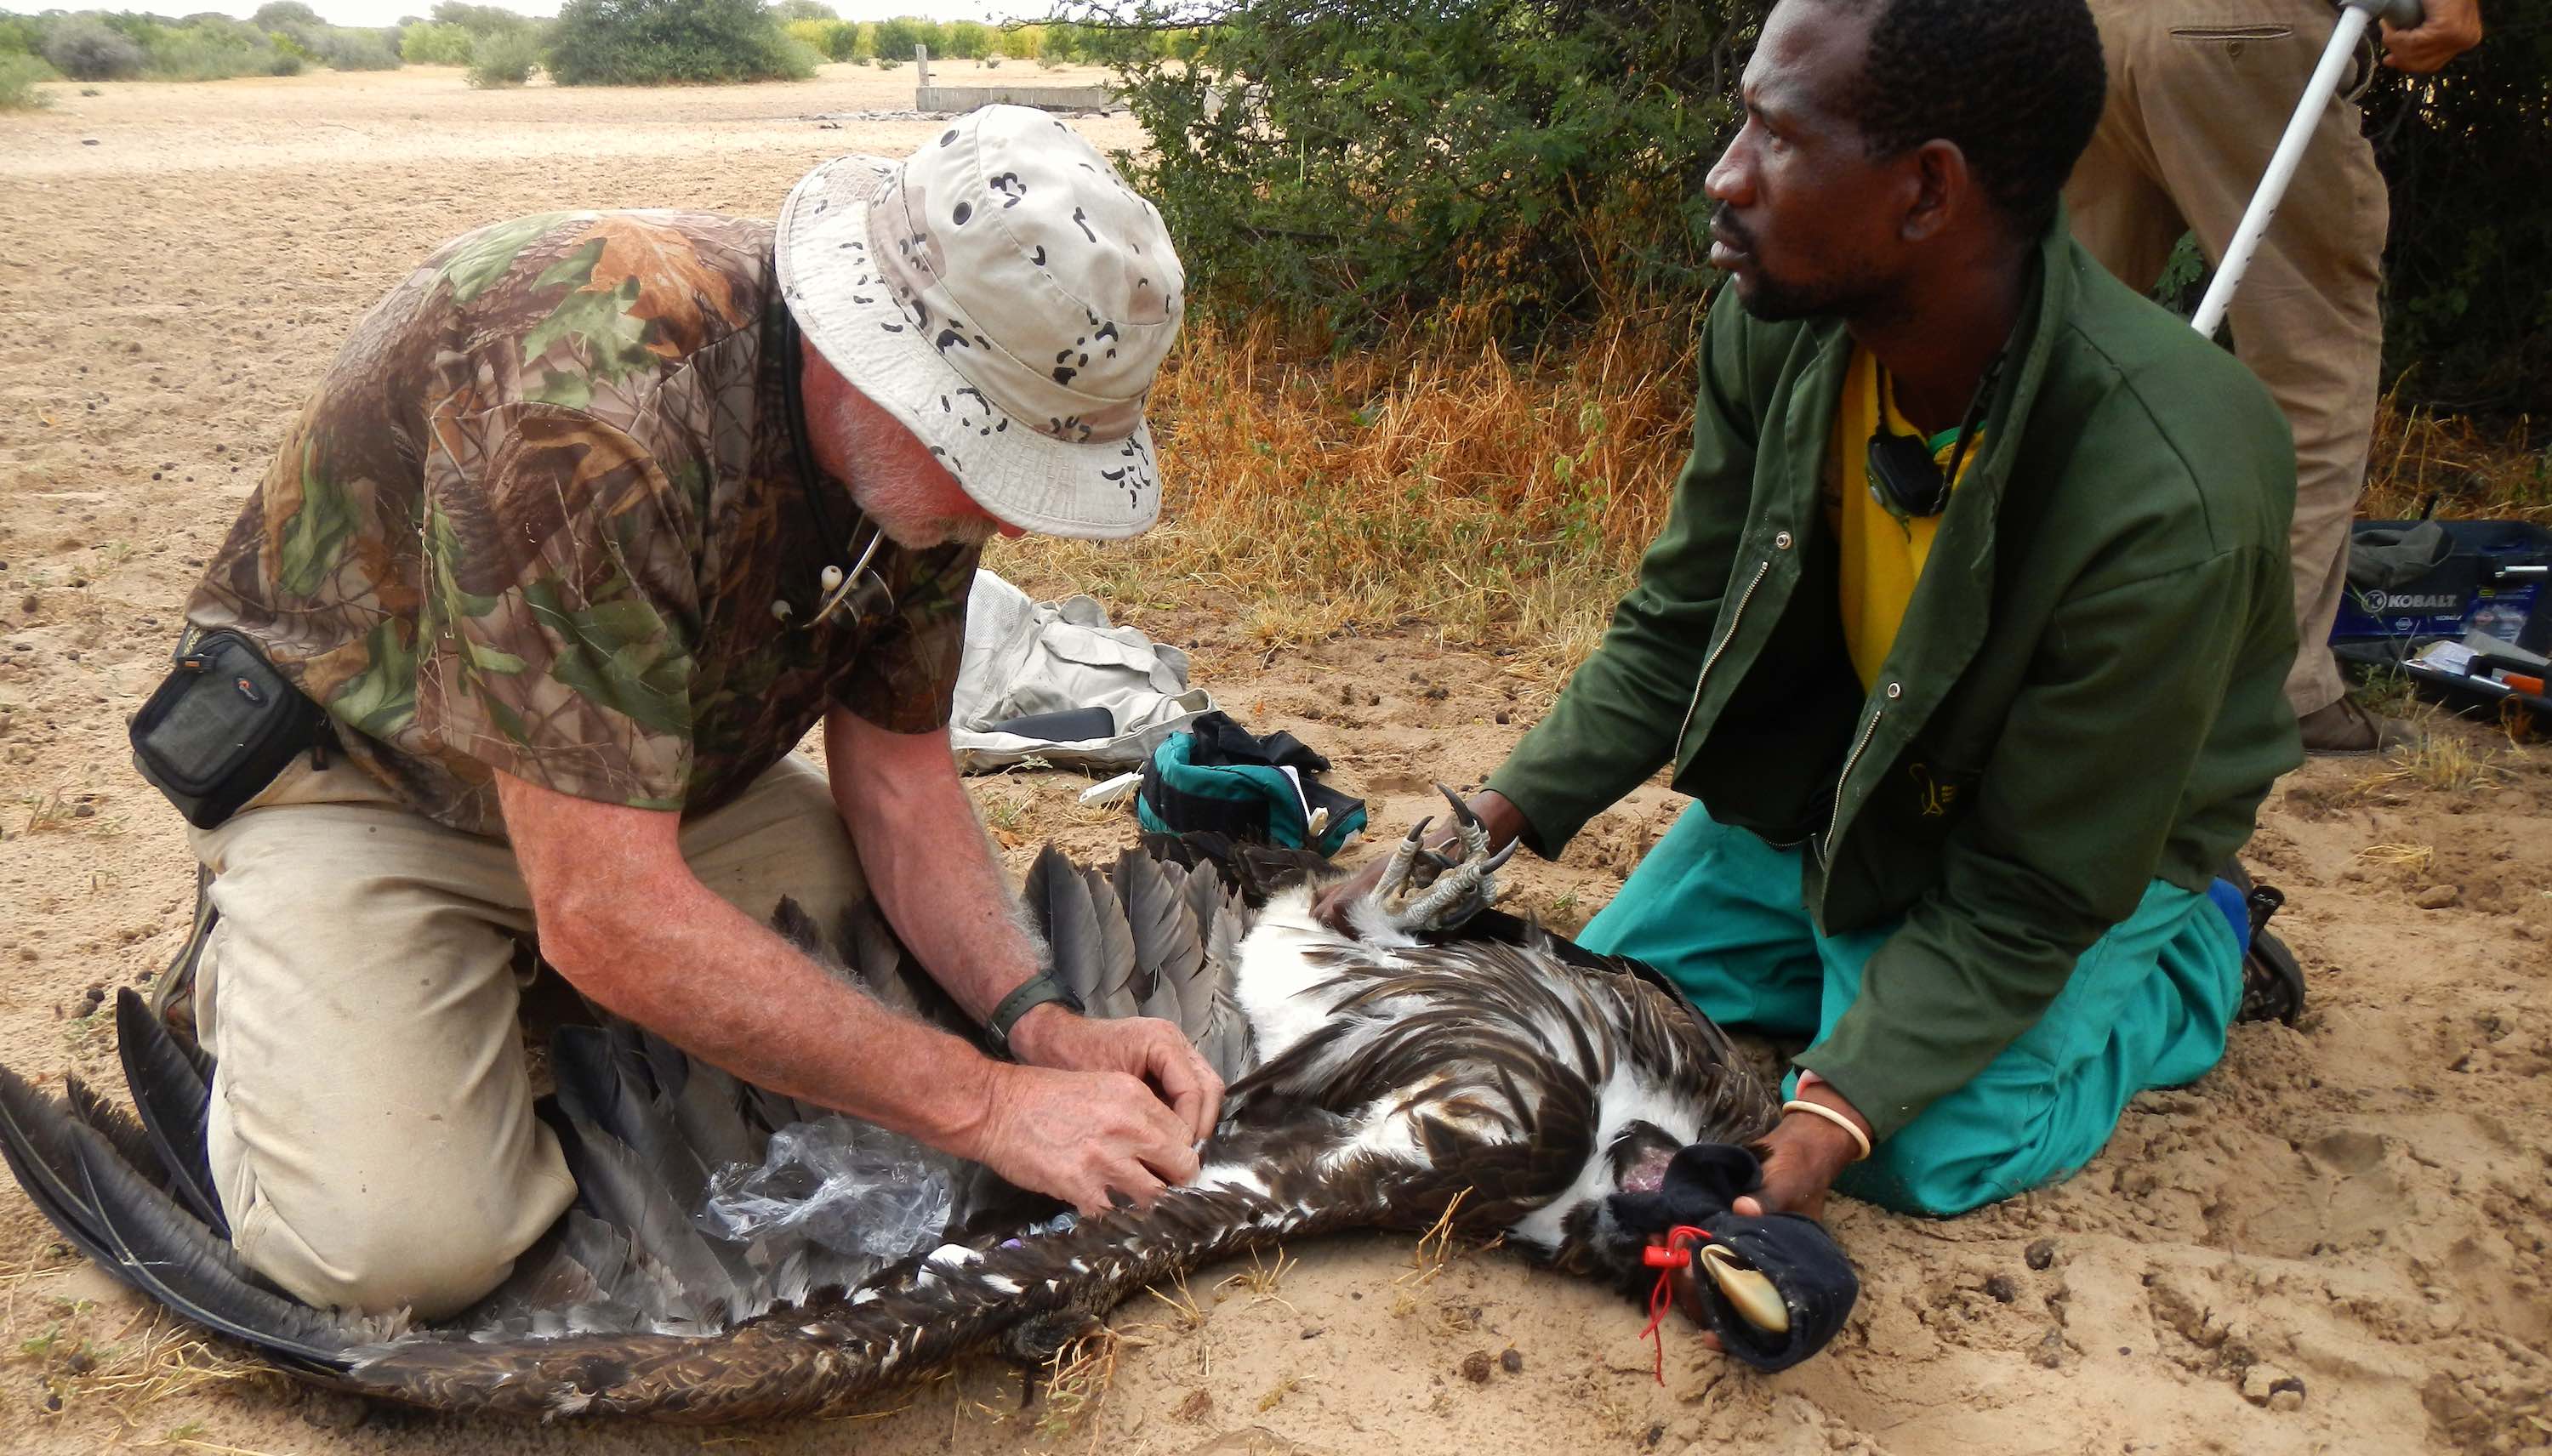 Two men work on a temporarily grounded vulture on the ground.